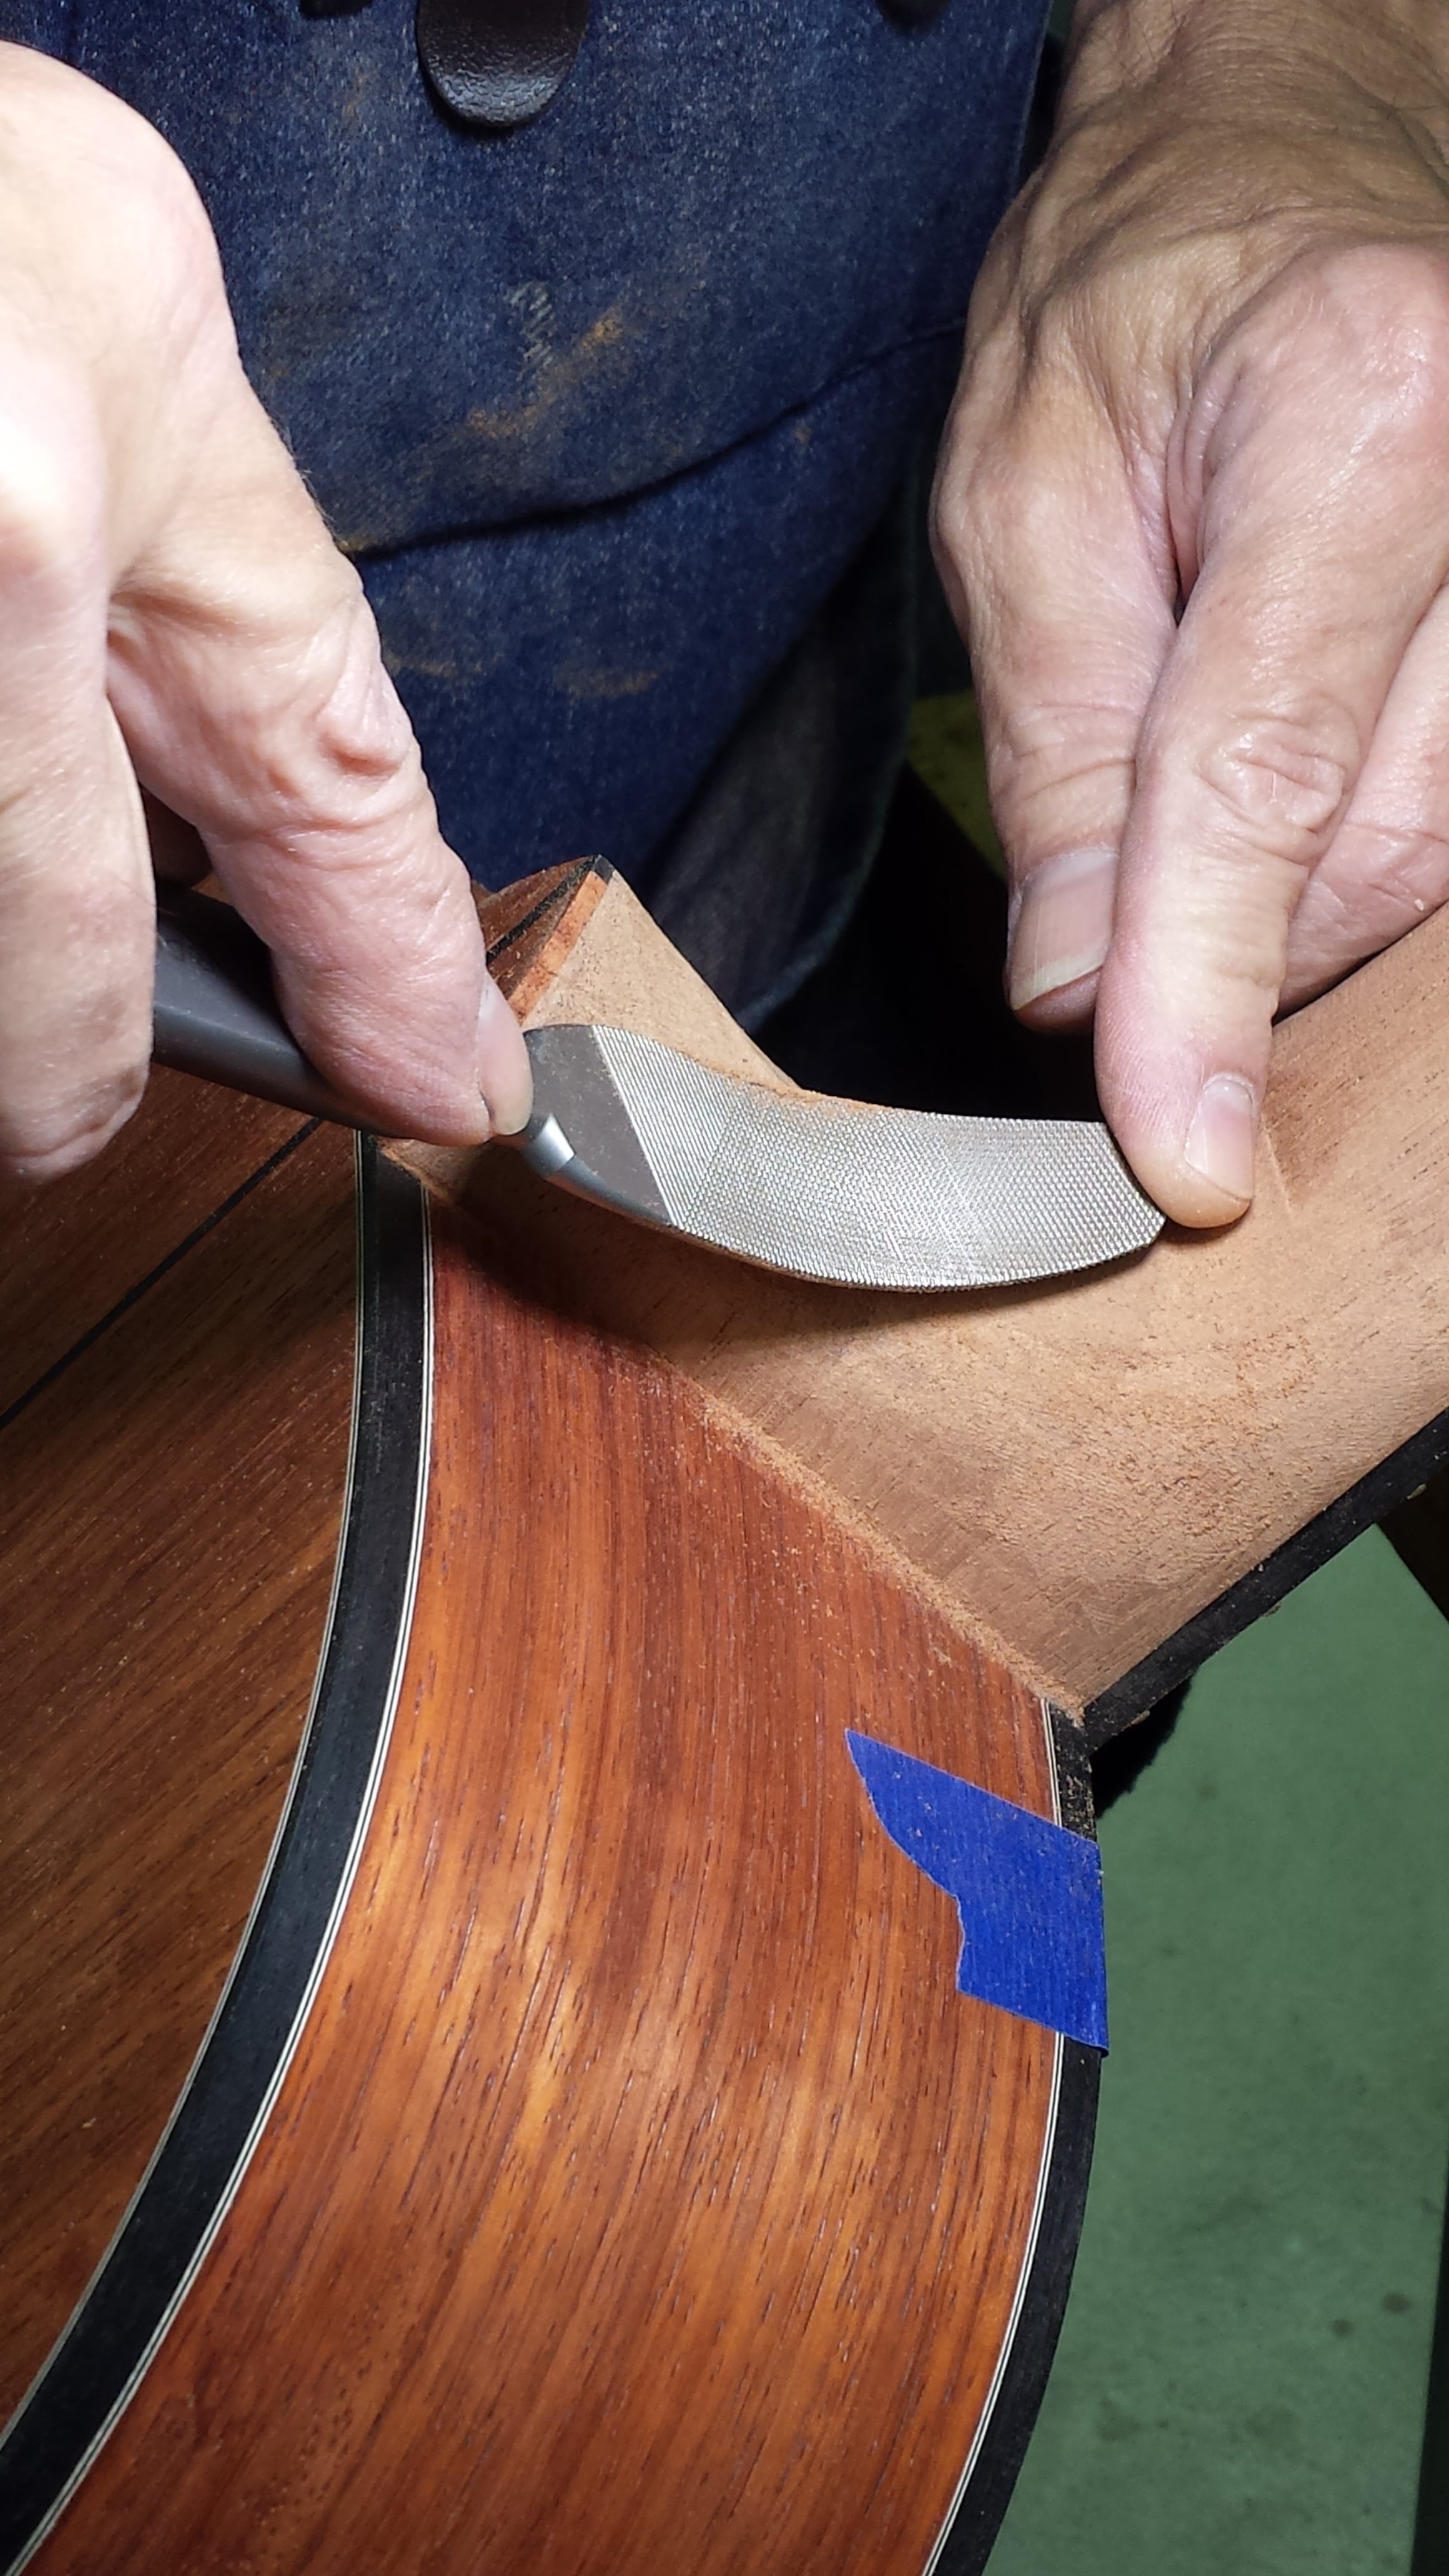 Shaping the heel - final stages